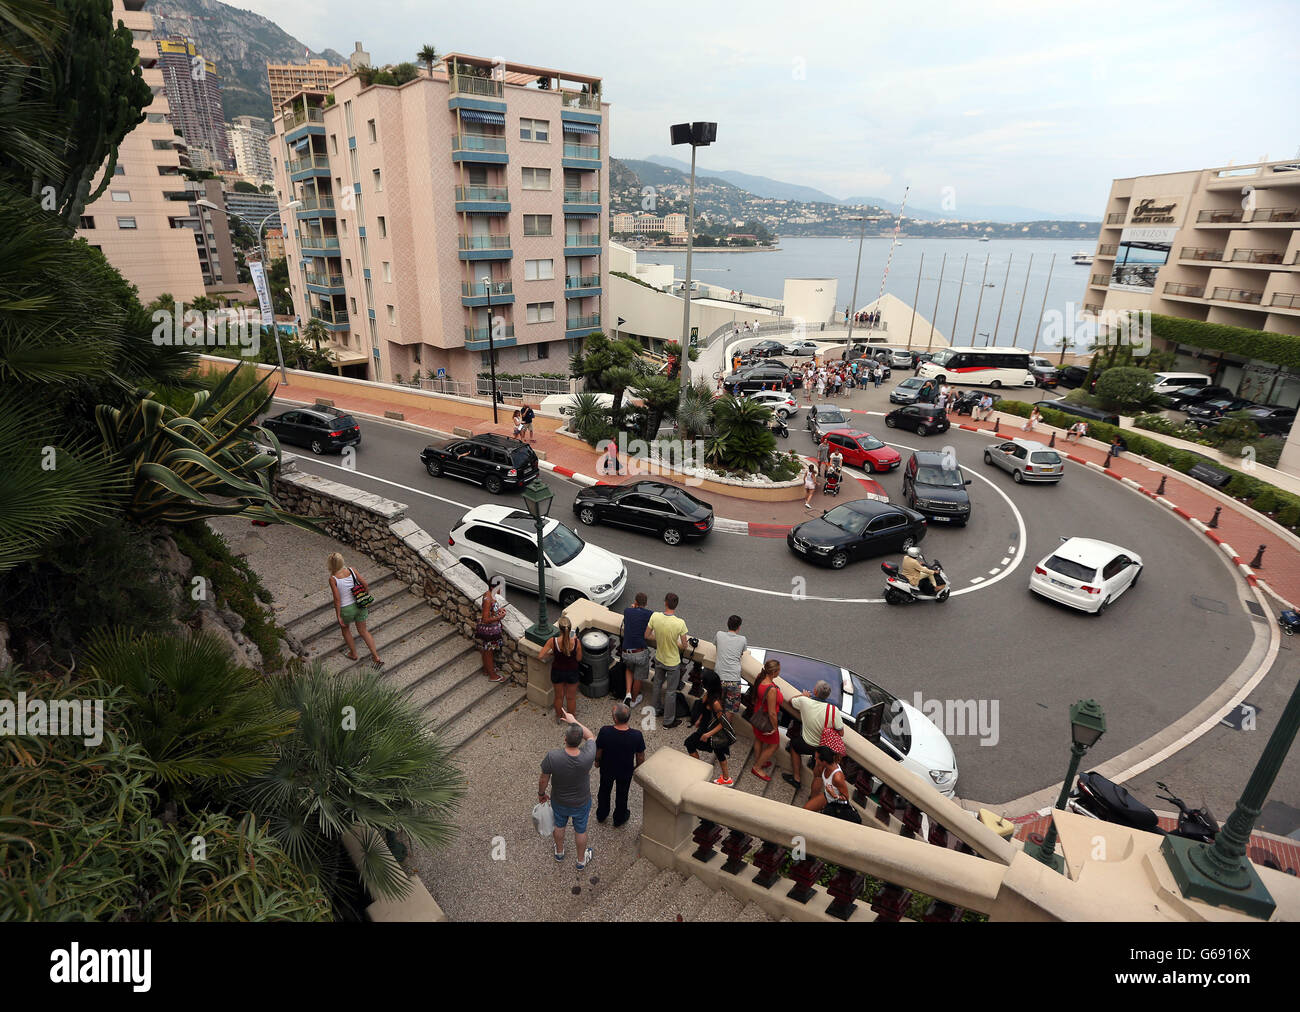 Car drivers make their way around the Fairmont hairpin, a famous part of the Monaco formula 1 grand prix circuit. PRESS ASSOCIATION Photo. Picture date: Thursday July 18, 2013. Photo credit should read: Dave Thompson/PA Wire Stock Photo